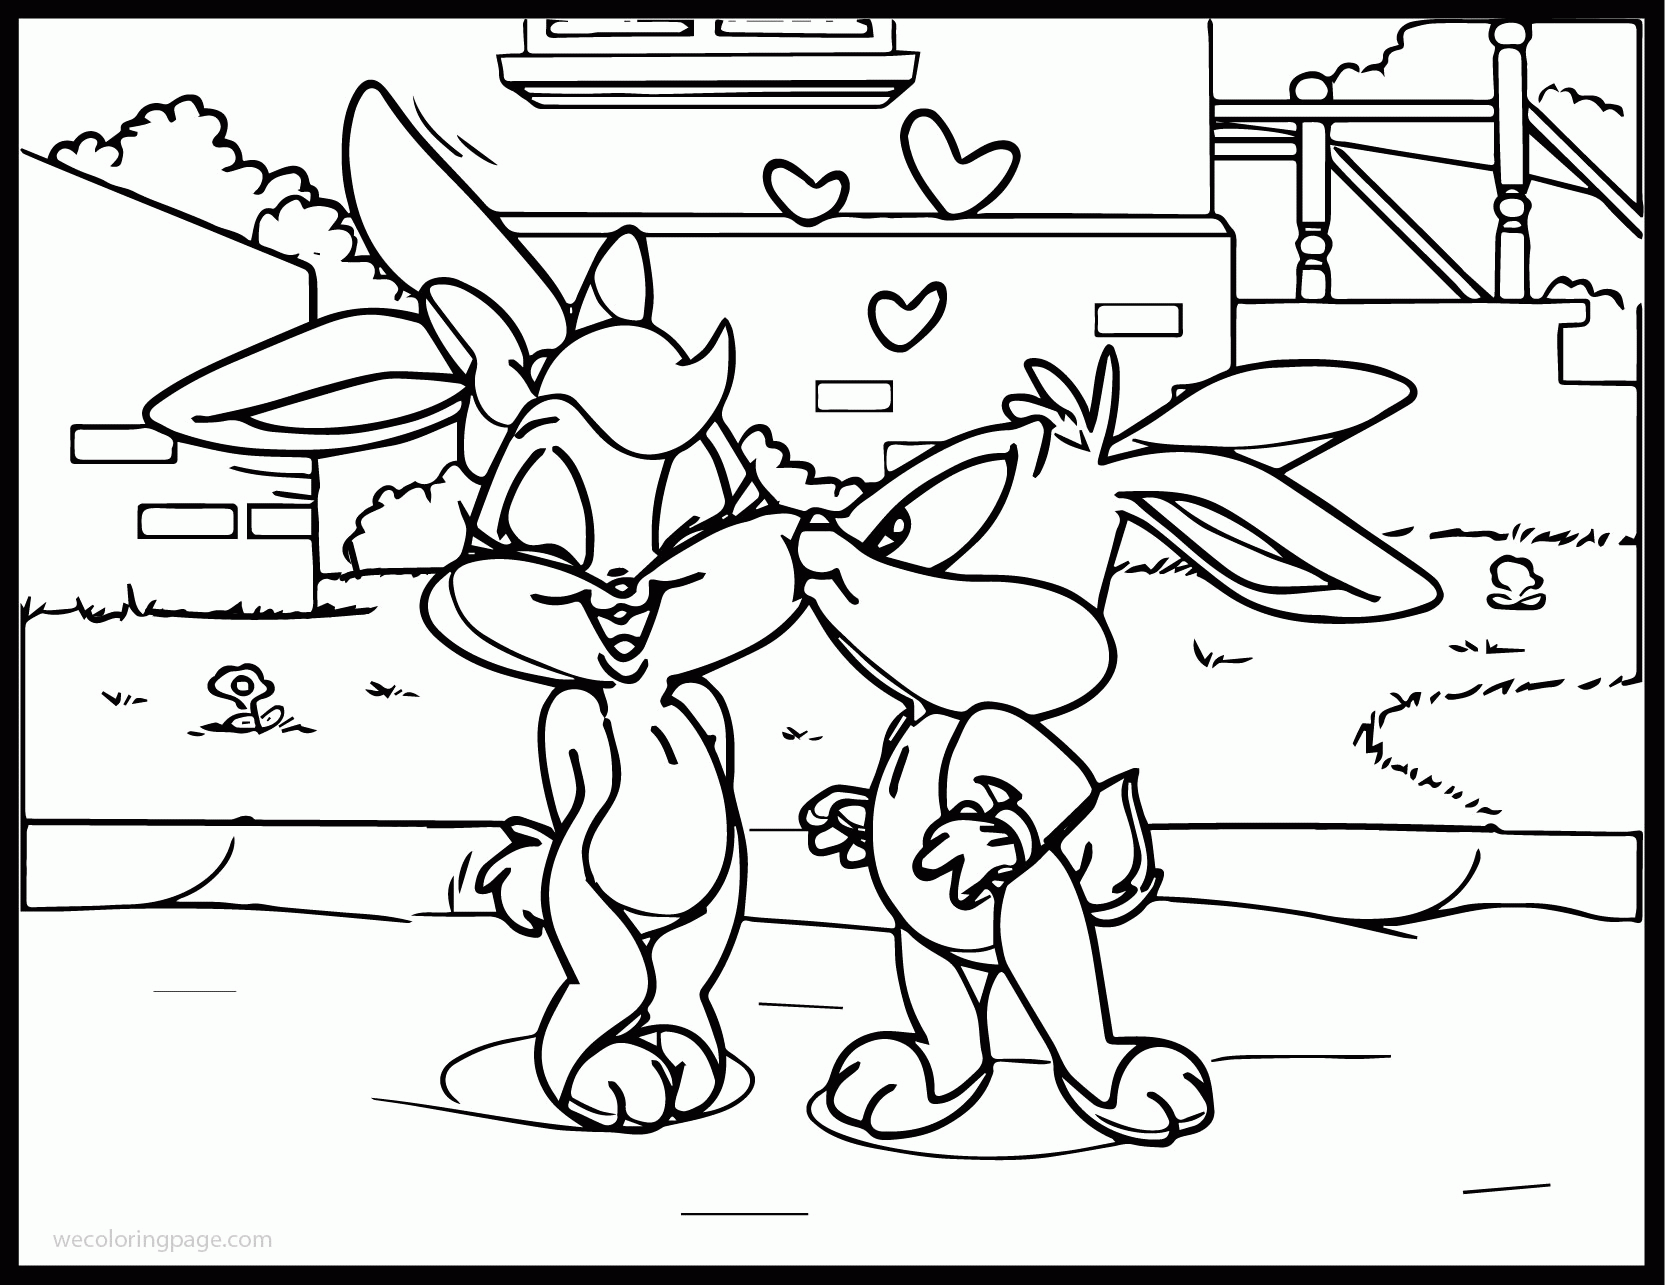 308 Cartoon Bugs And Lola Coloring Pages for Adult